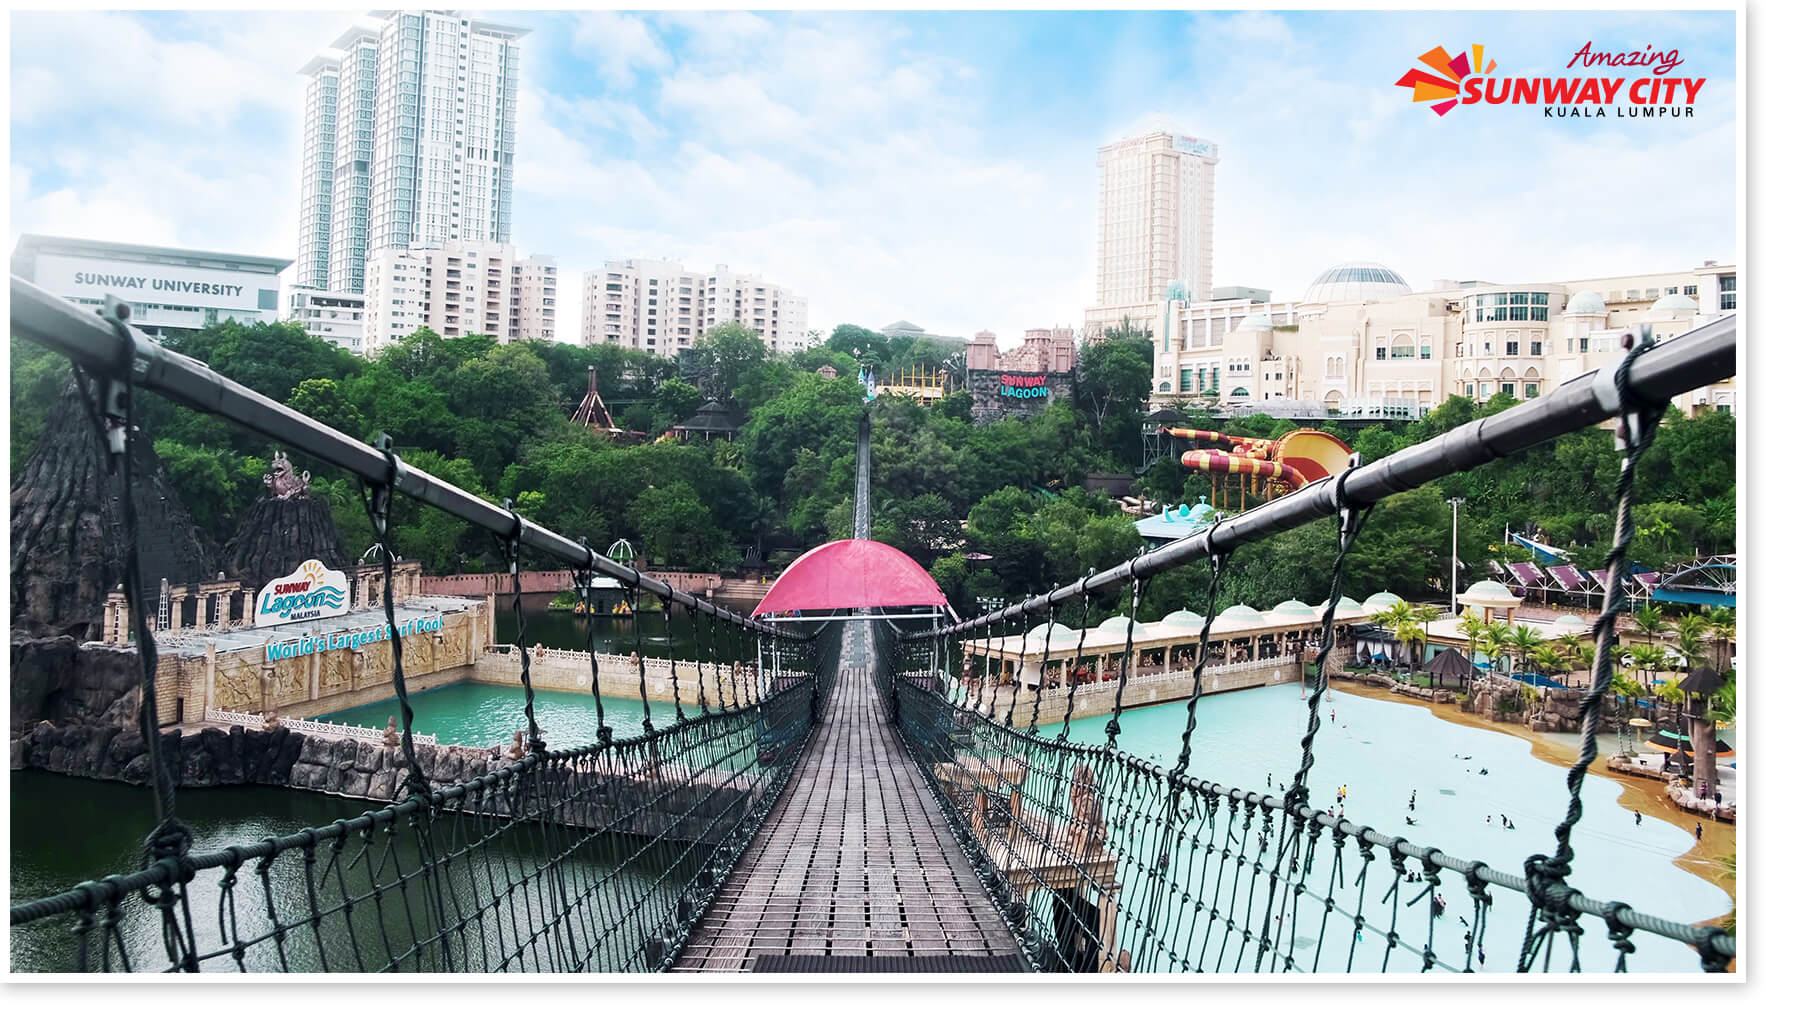 Get a stunning panoramic view of Sunway Lagoon all the way up here!